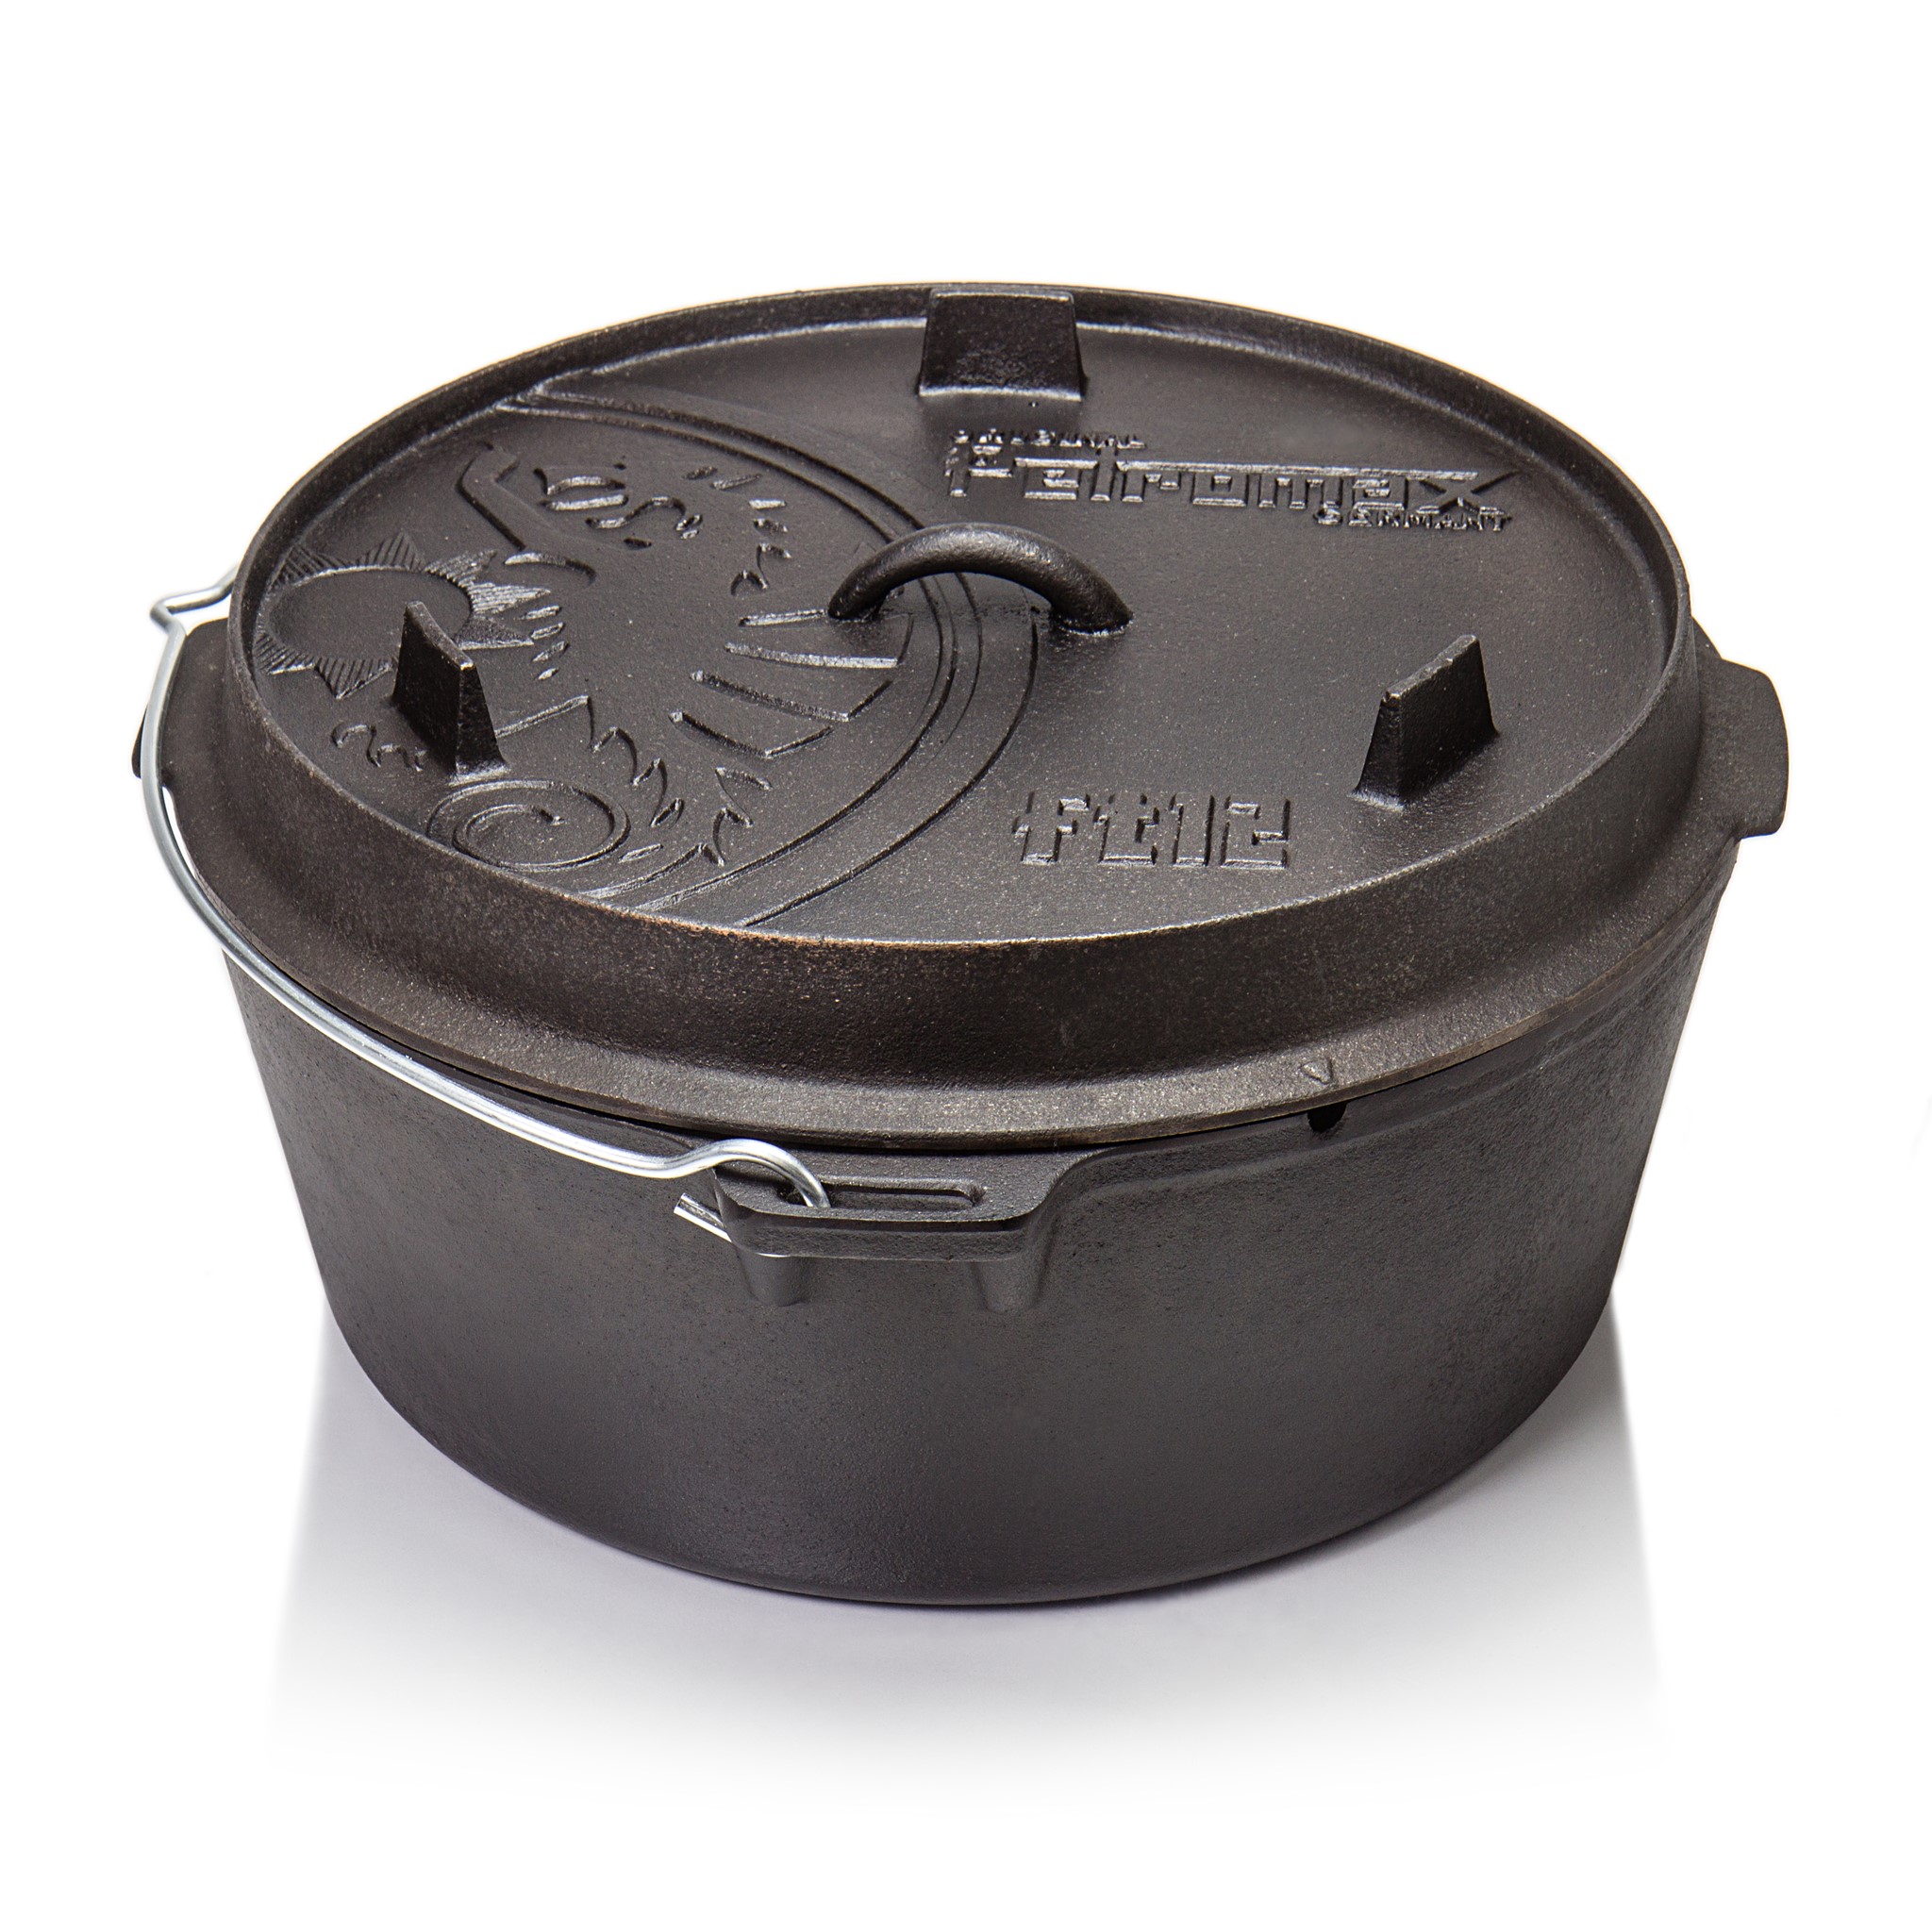 Picture of Petromax - Dutch Oven FT12 Camp Oven 10.8 Liters (without feet)